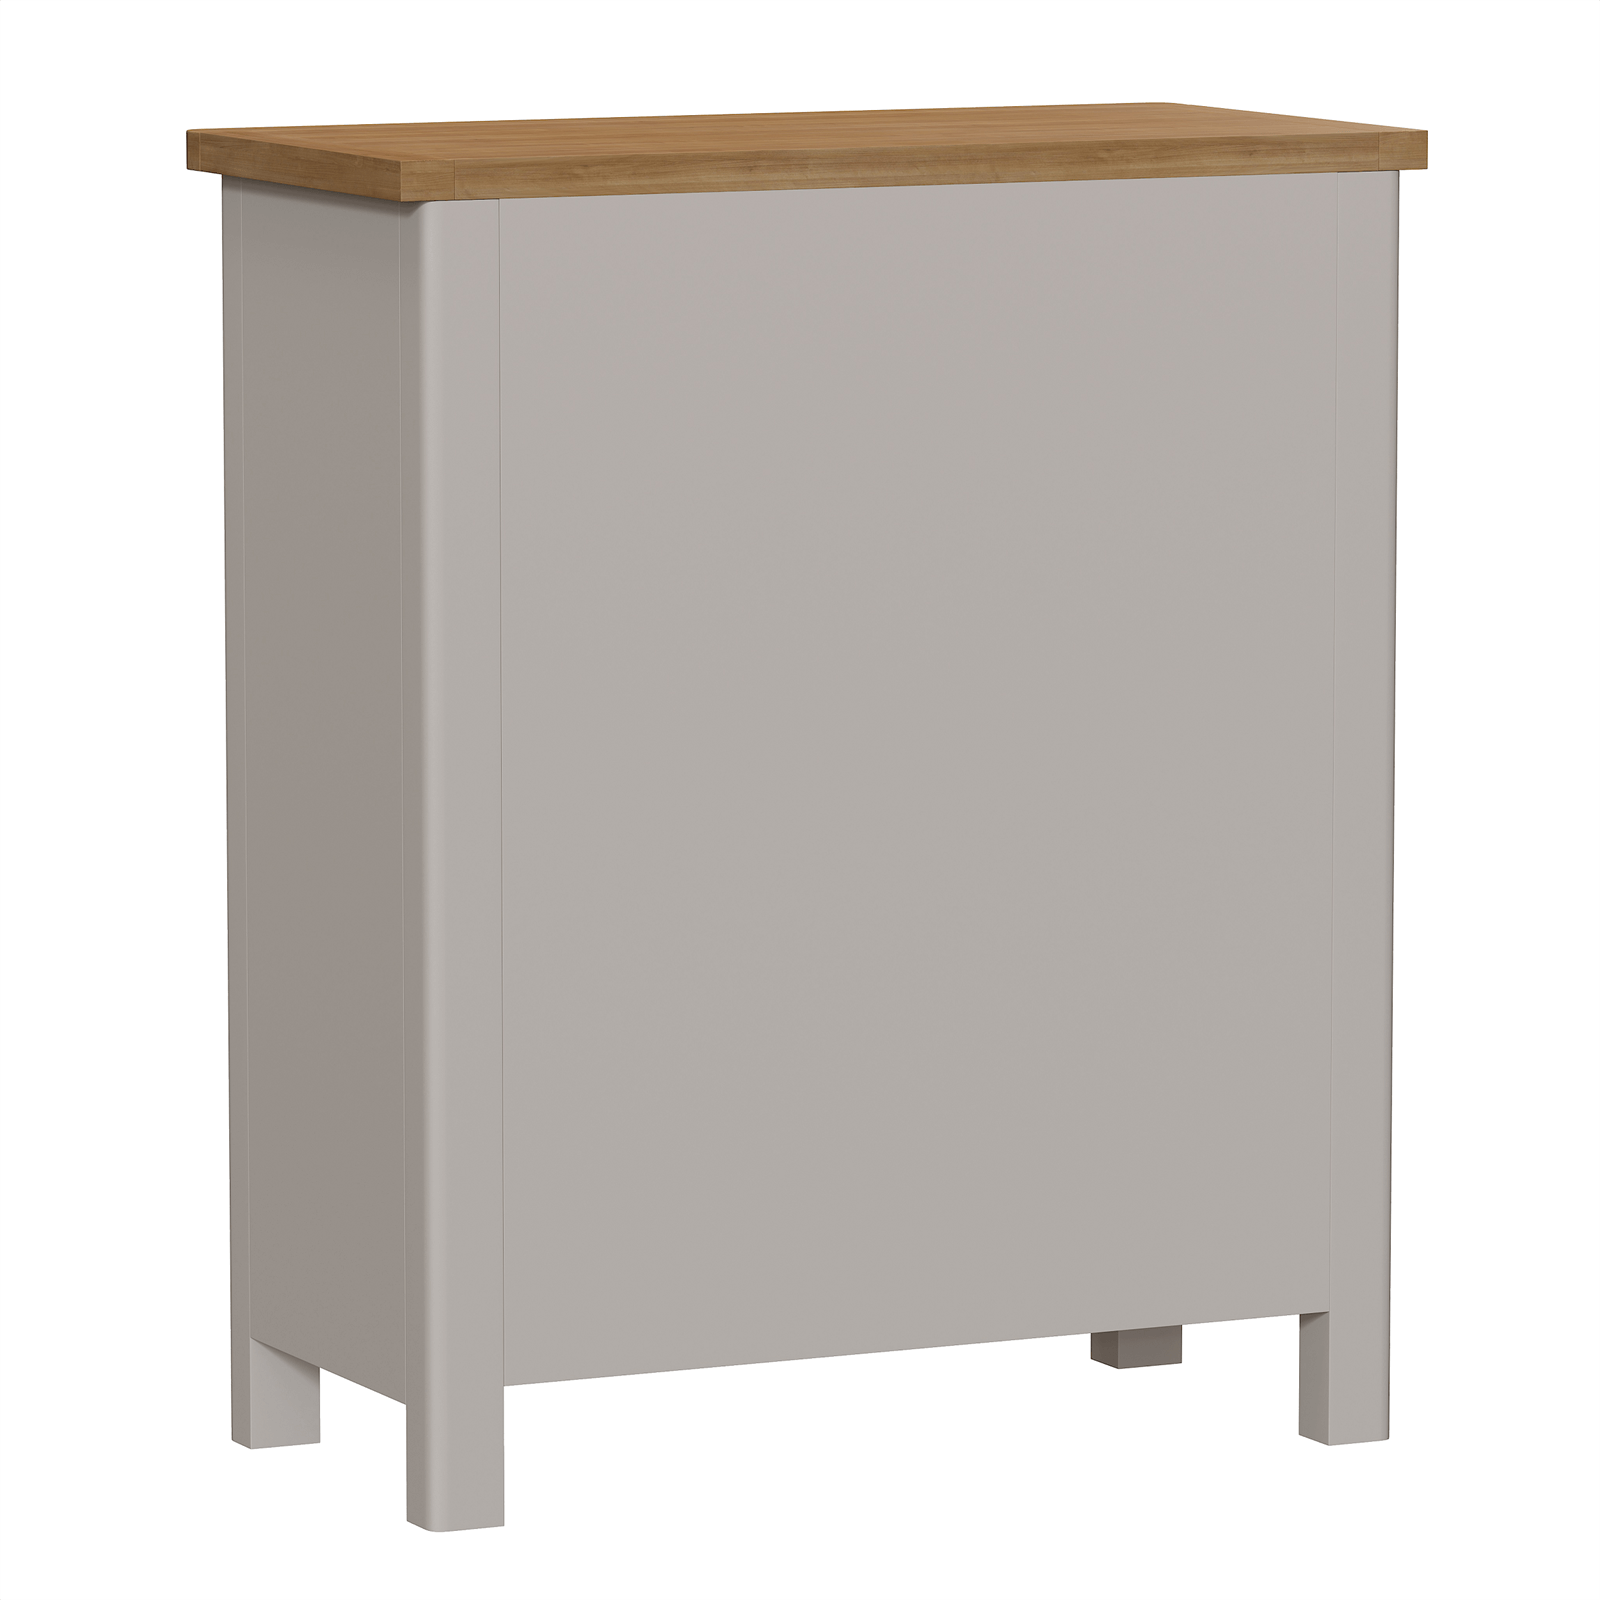 Padstow 2 Over 3 Chest of Drawers - Truffle